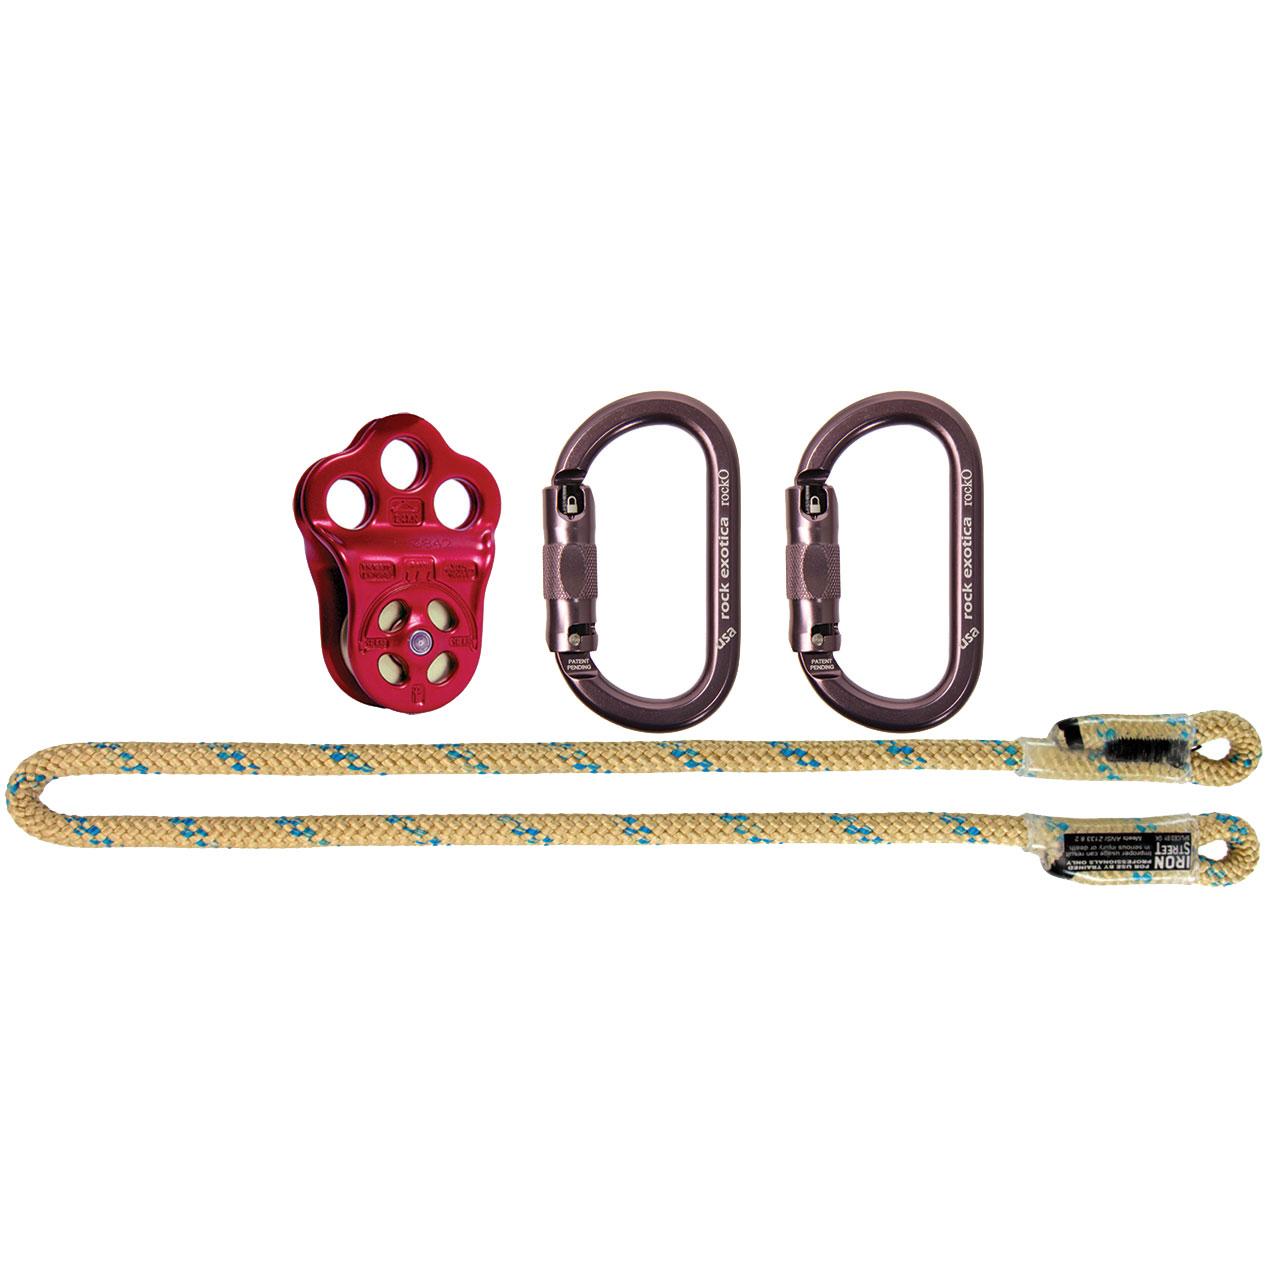 Hitch Climber Set 3 For 11mm-12mm Ropes